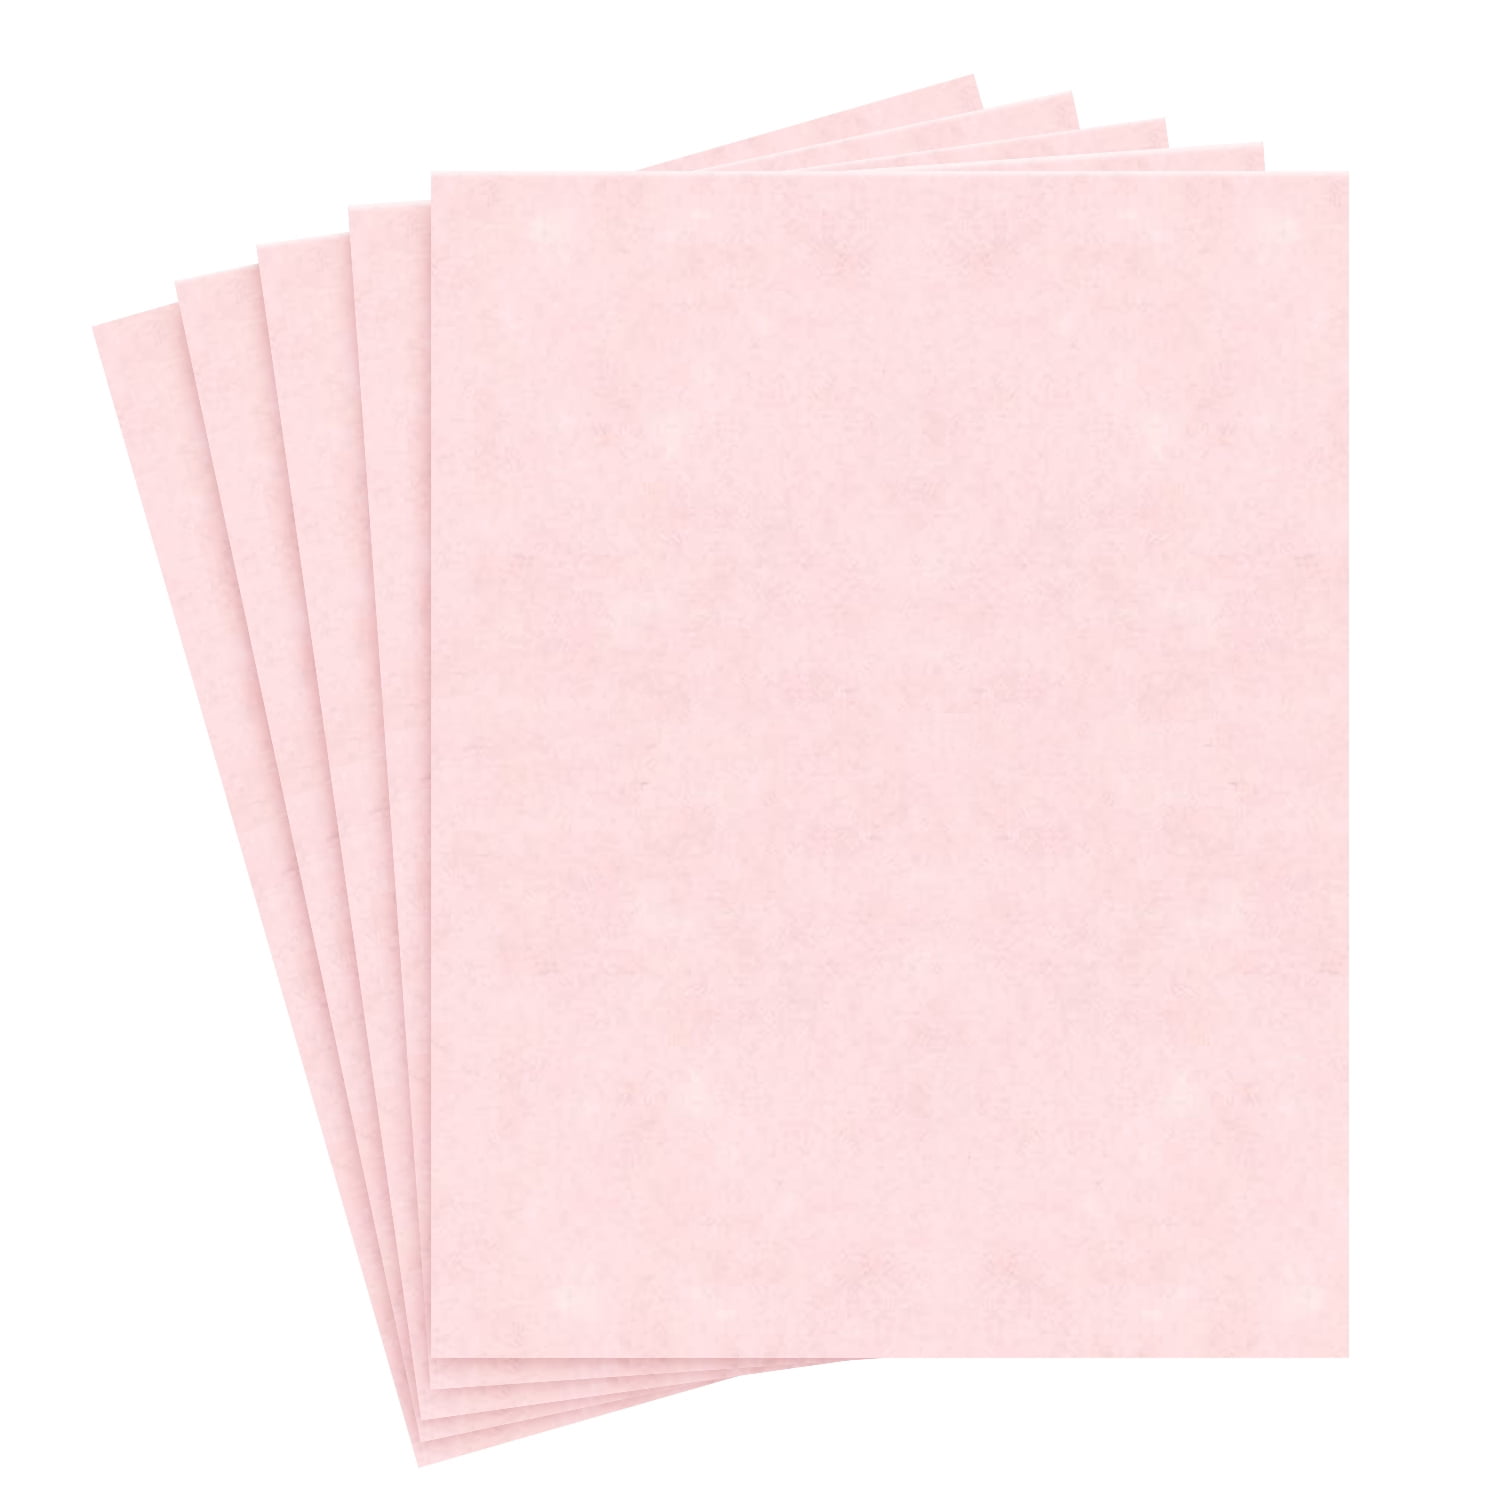 Natural Stationery Parchment Paper – Great for Writing, Certificates, Menus and Wedding Invitations | 24lb Bond Paper | 8.5 x 11” | 50 Sheets/Pack